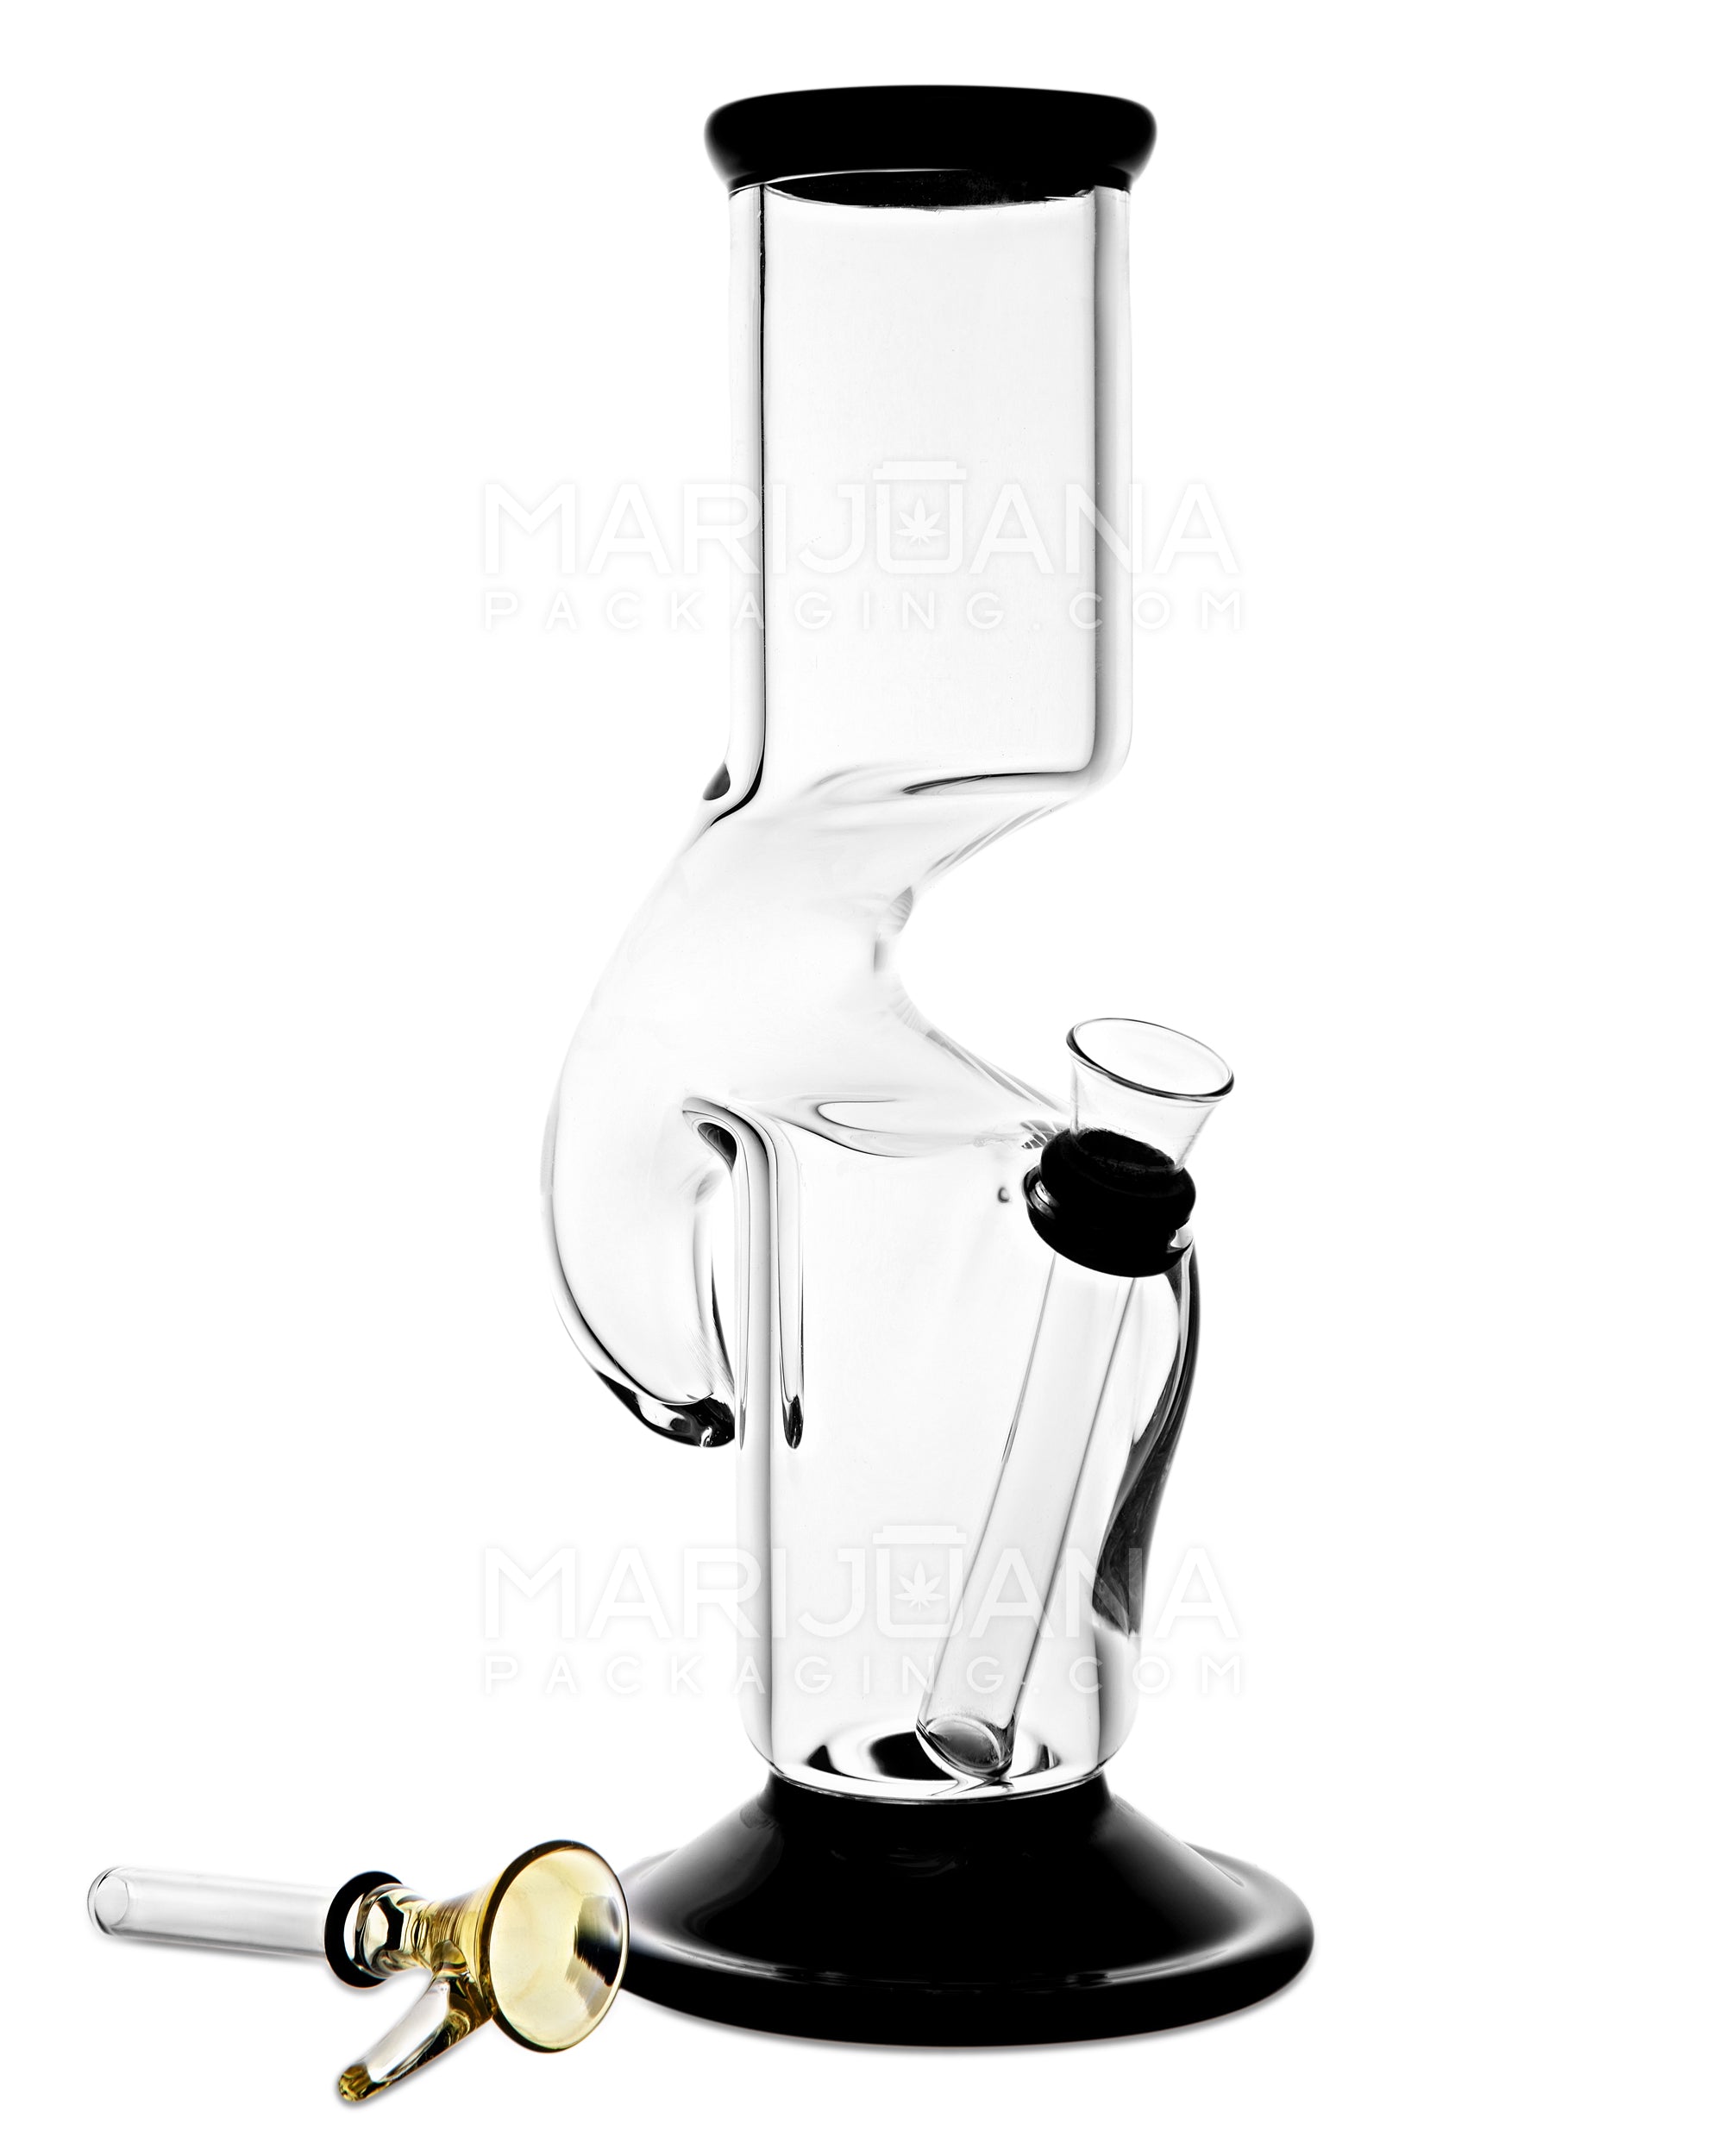 USA Glass | Hooked Z-Neck Glass Water Pipe w/ Ice Catcher | 9in Tall - Grommet Bowl - Black - 2